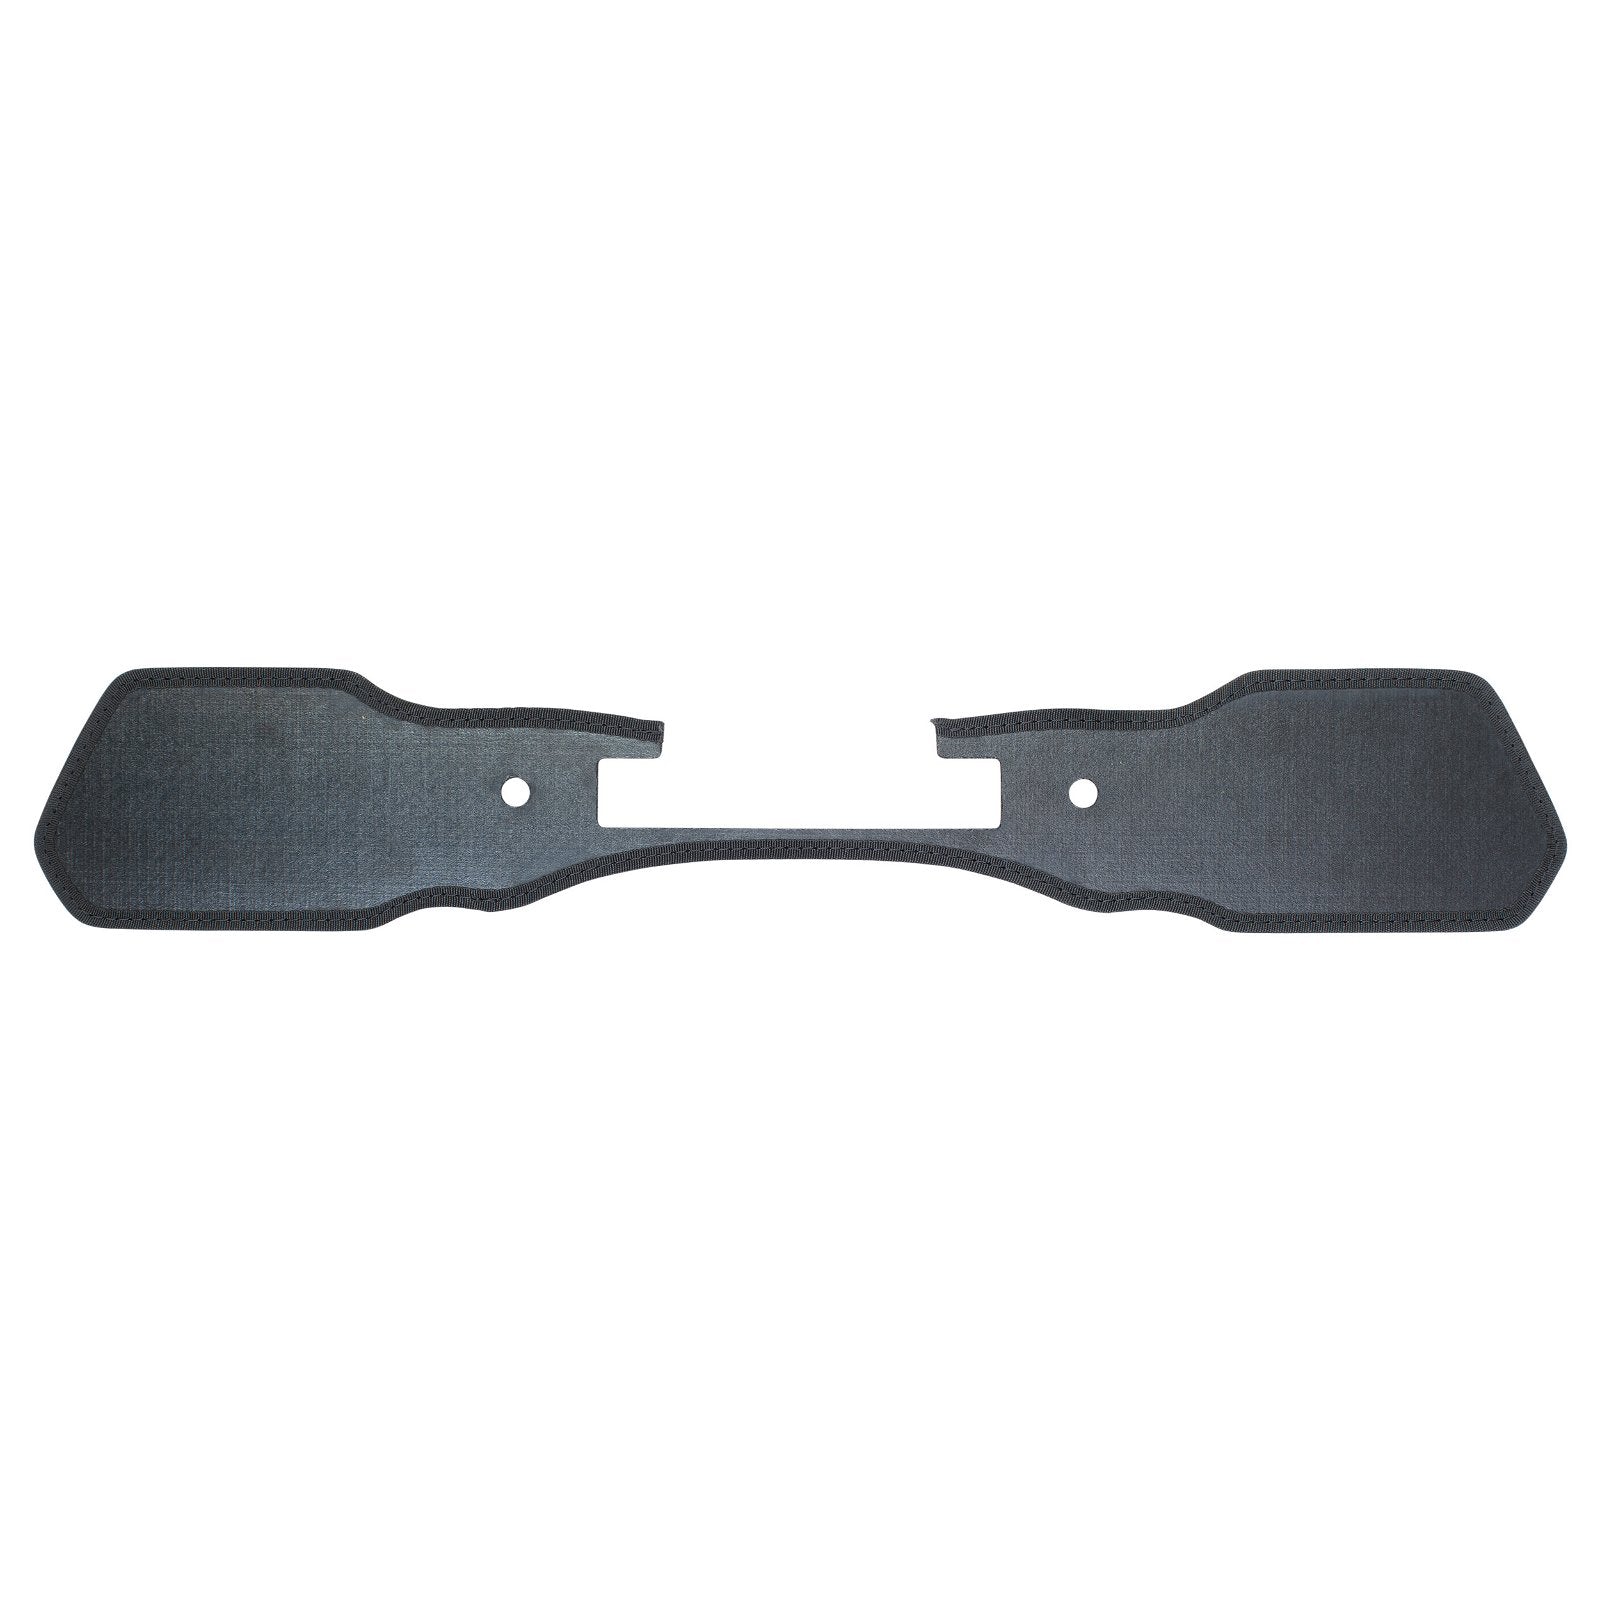 ION Flaps Spectre-Bar (SS21 onwards) 2022-ION Water-22-Black-48210-8027-9010583014876-Surf-store.com